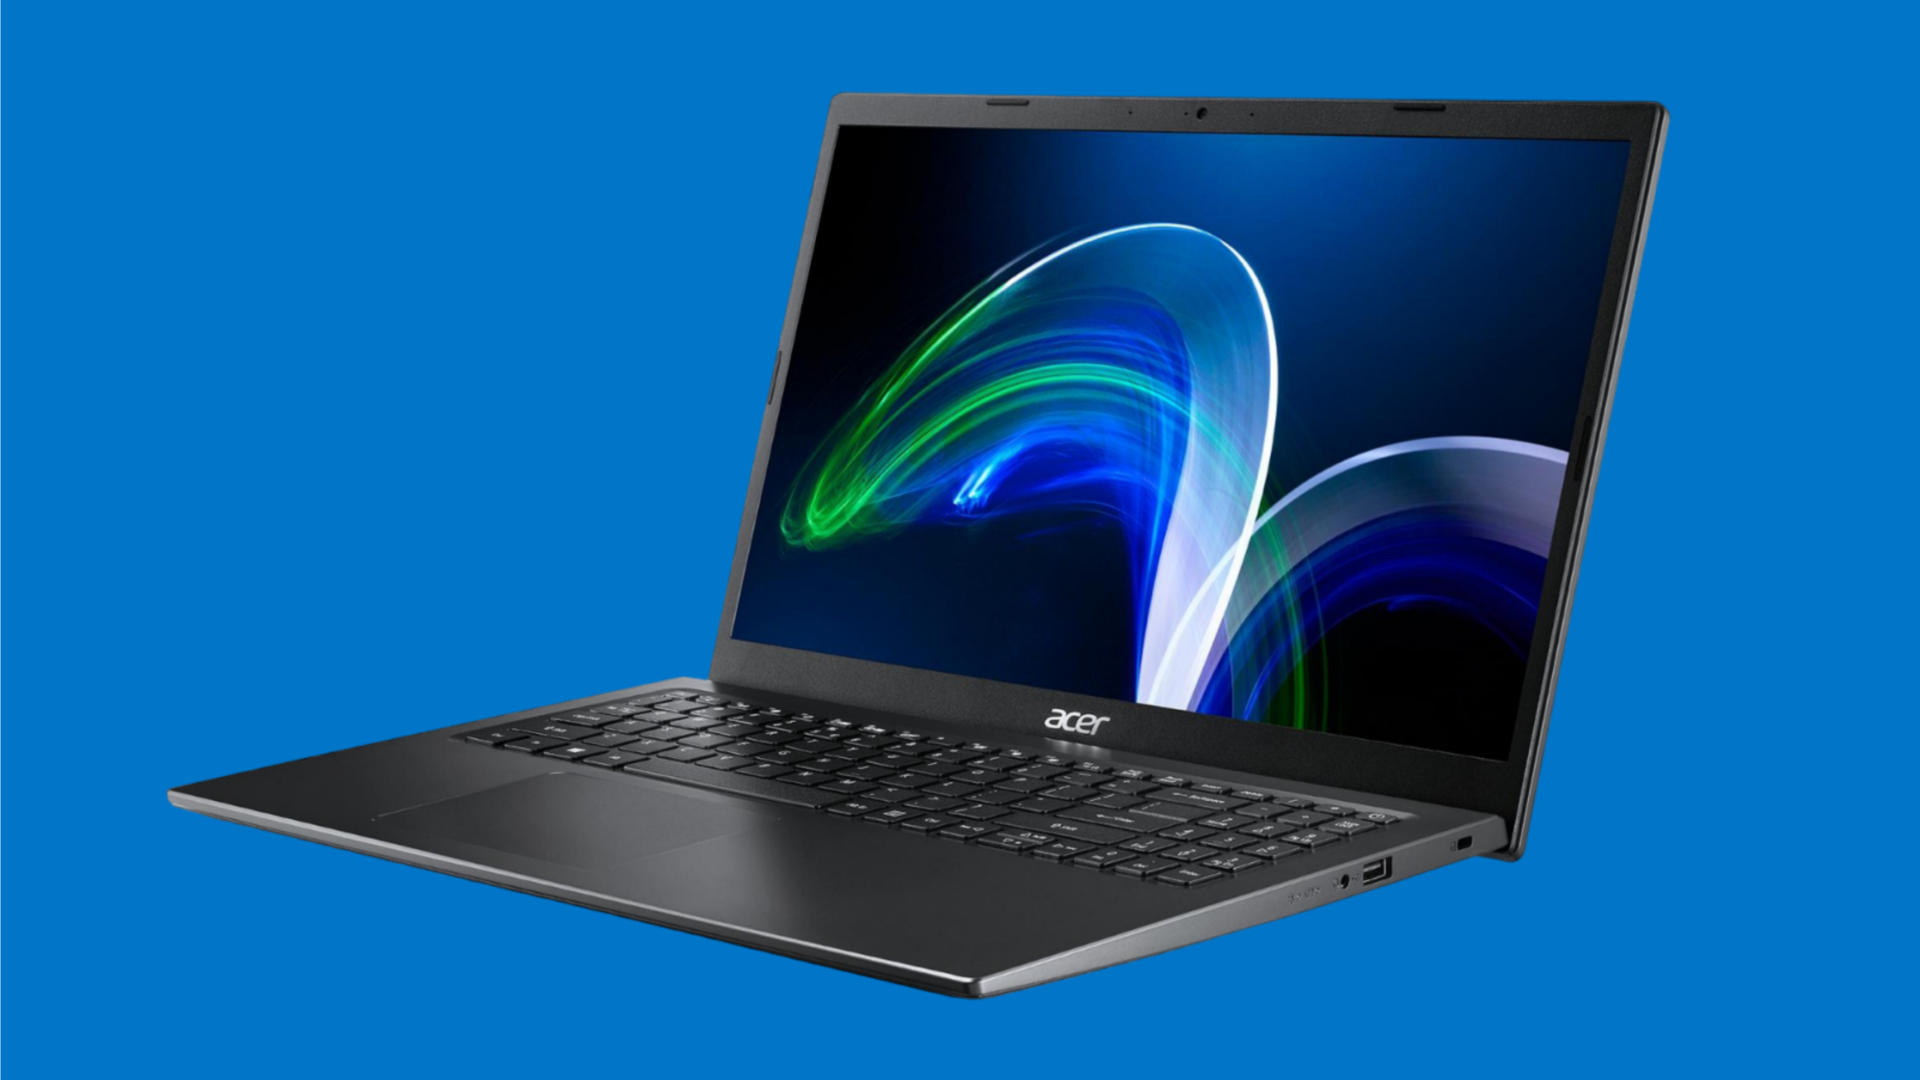 Acer Extensa, with Intel Core i5 chip, is now cheaper